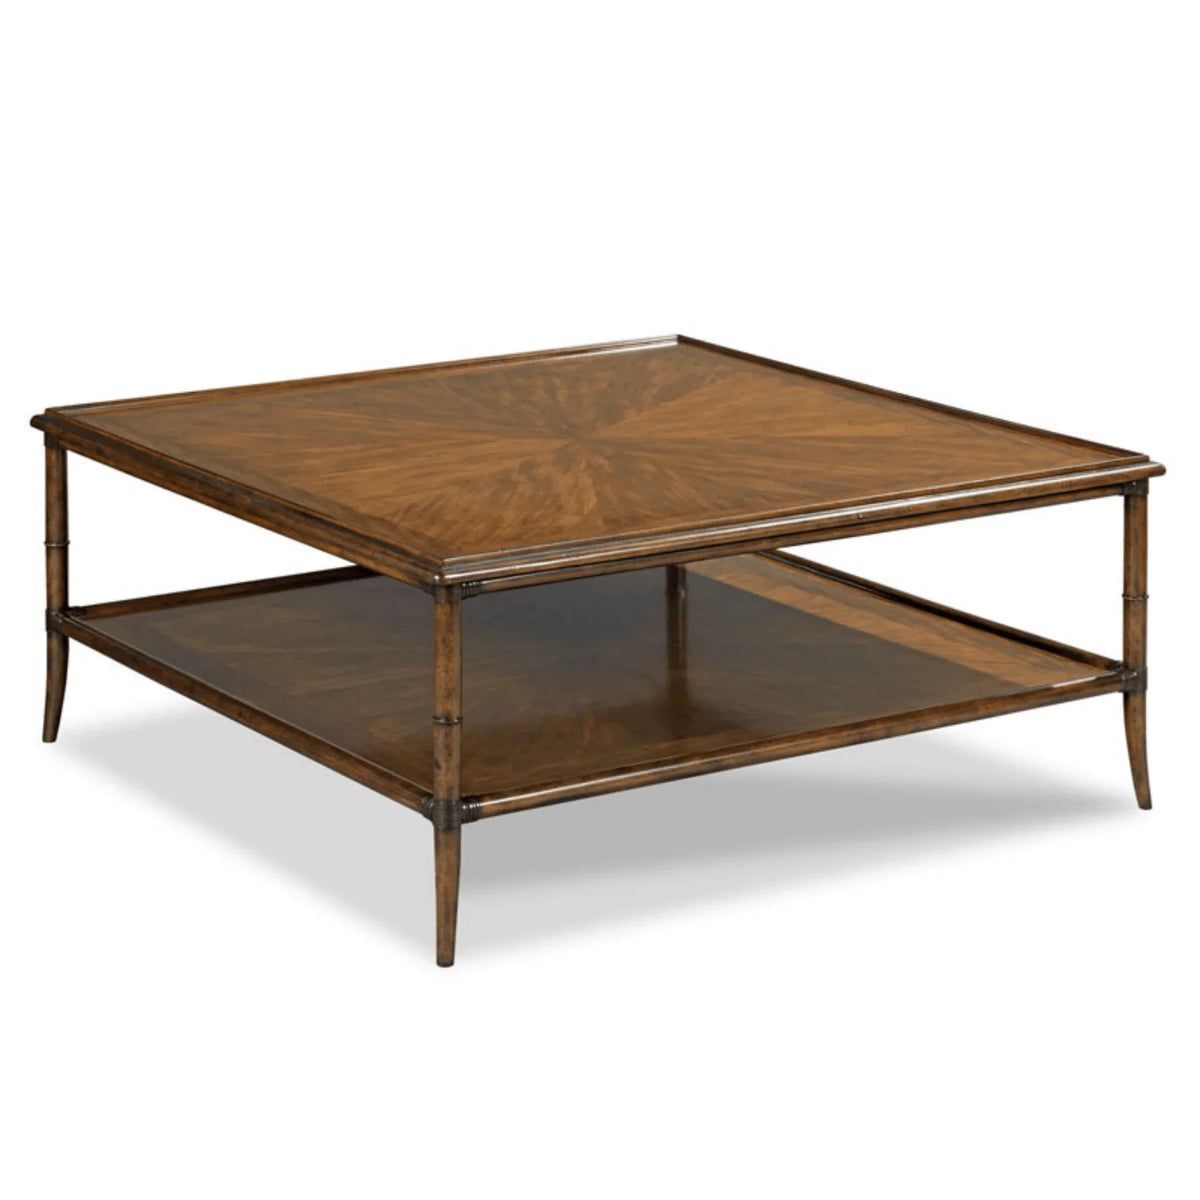 Linwood Square Cocktail Table | The Well Appointed House, LLC